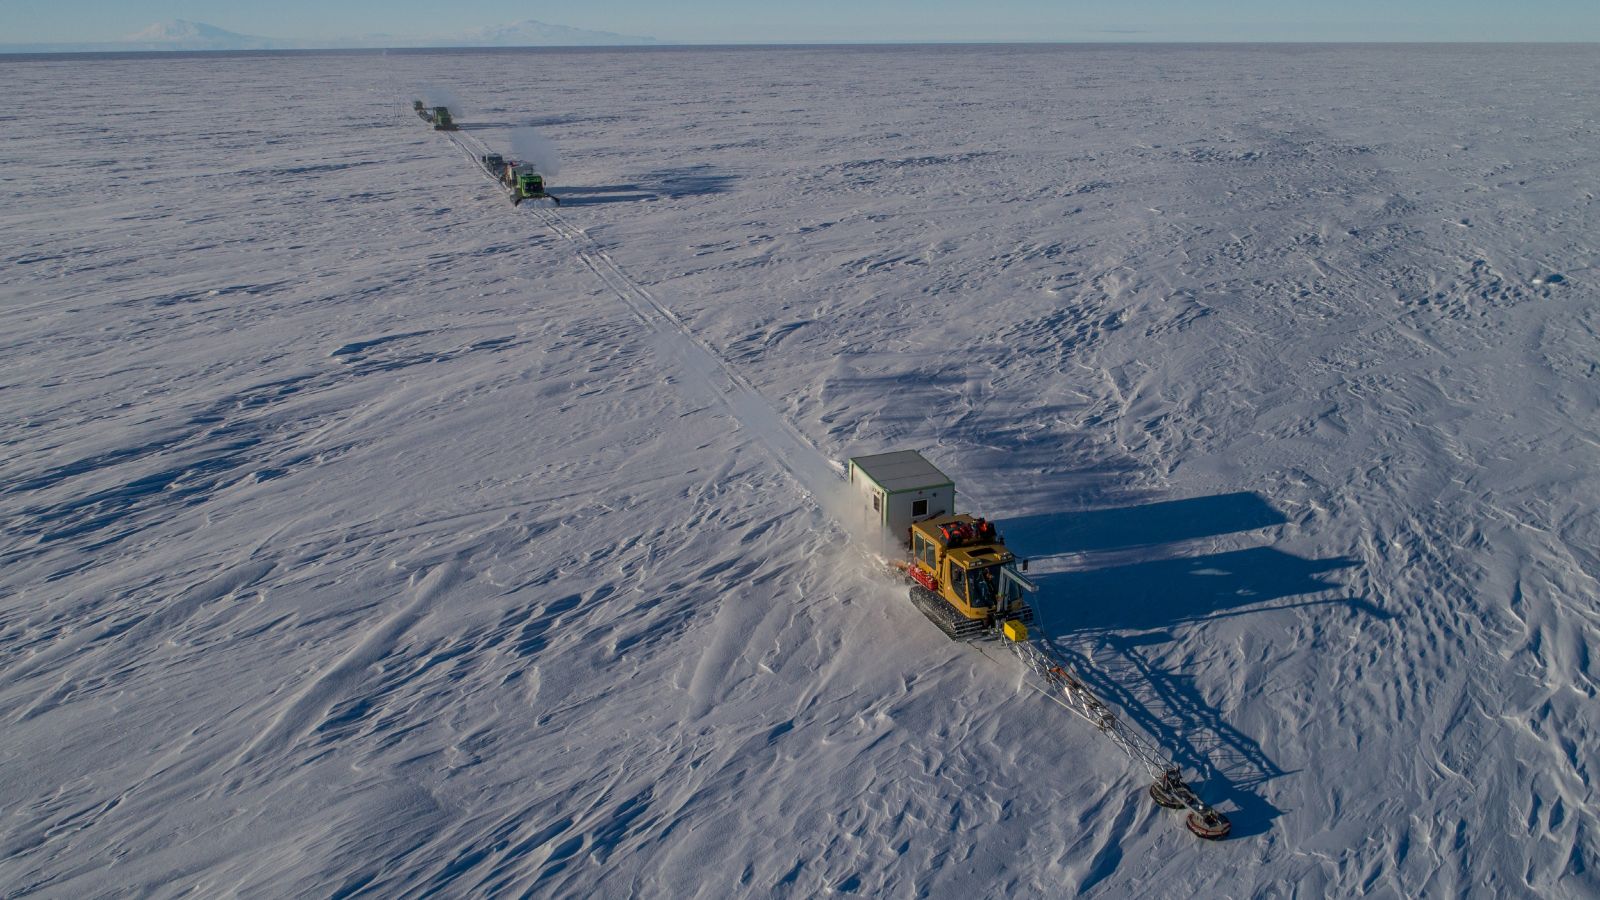 Antarctic researchers are preparing to drill into the ocean floor below the Ross Ice Shelf.